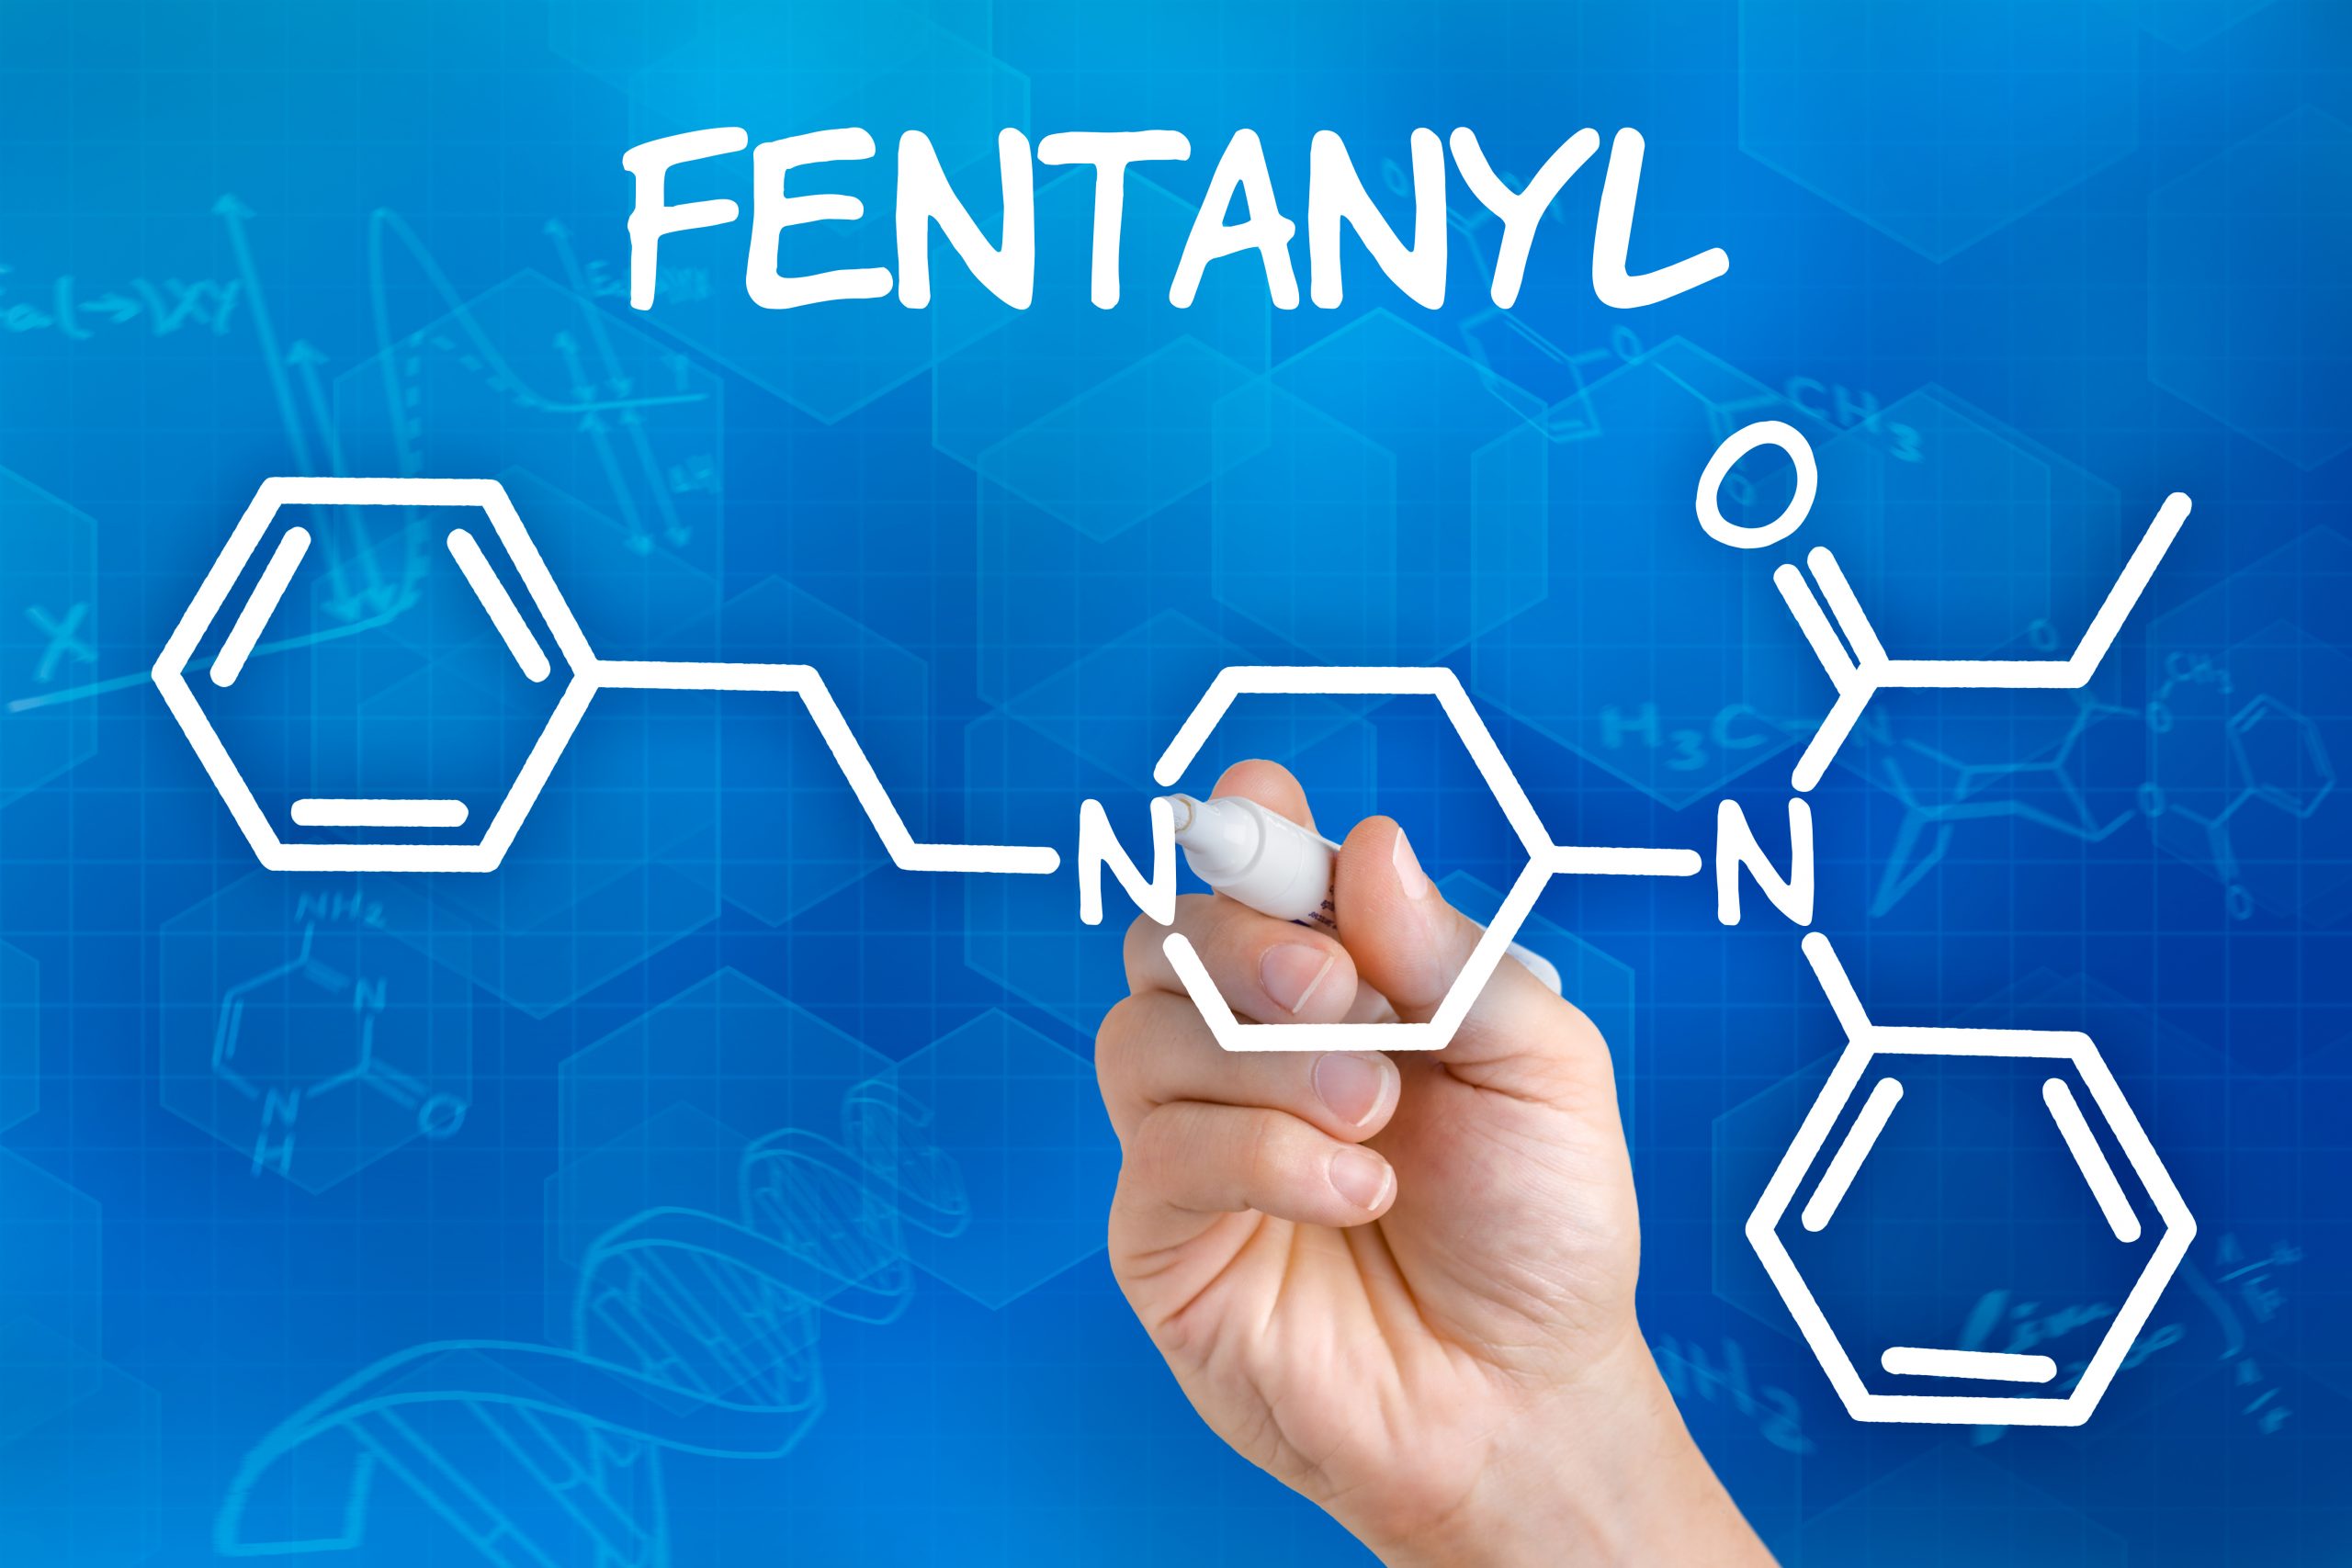 How Addictive is Fentanyl and Why it is so Dangerous?